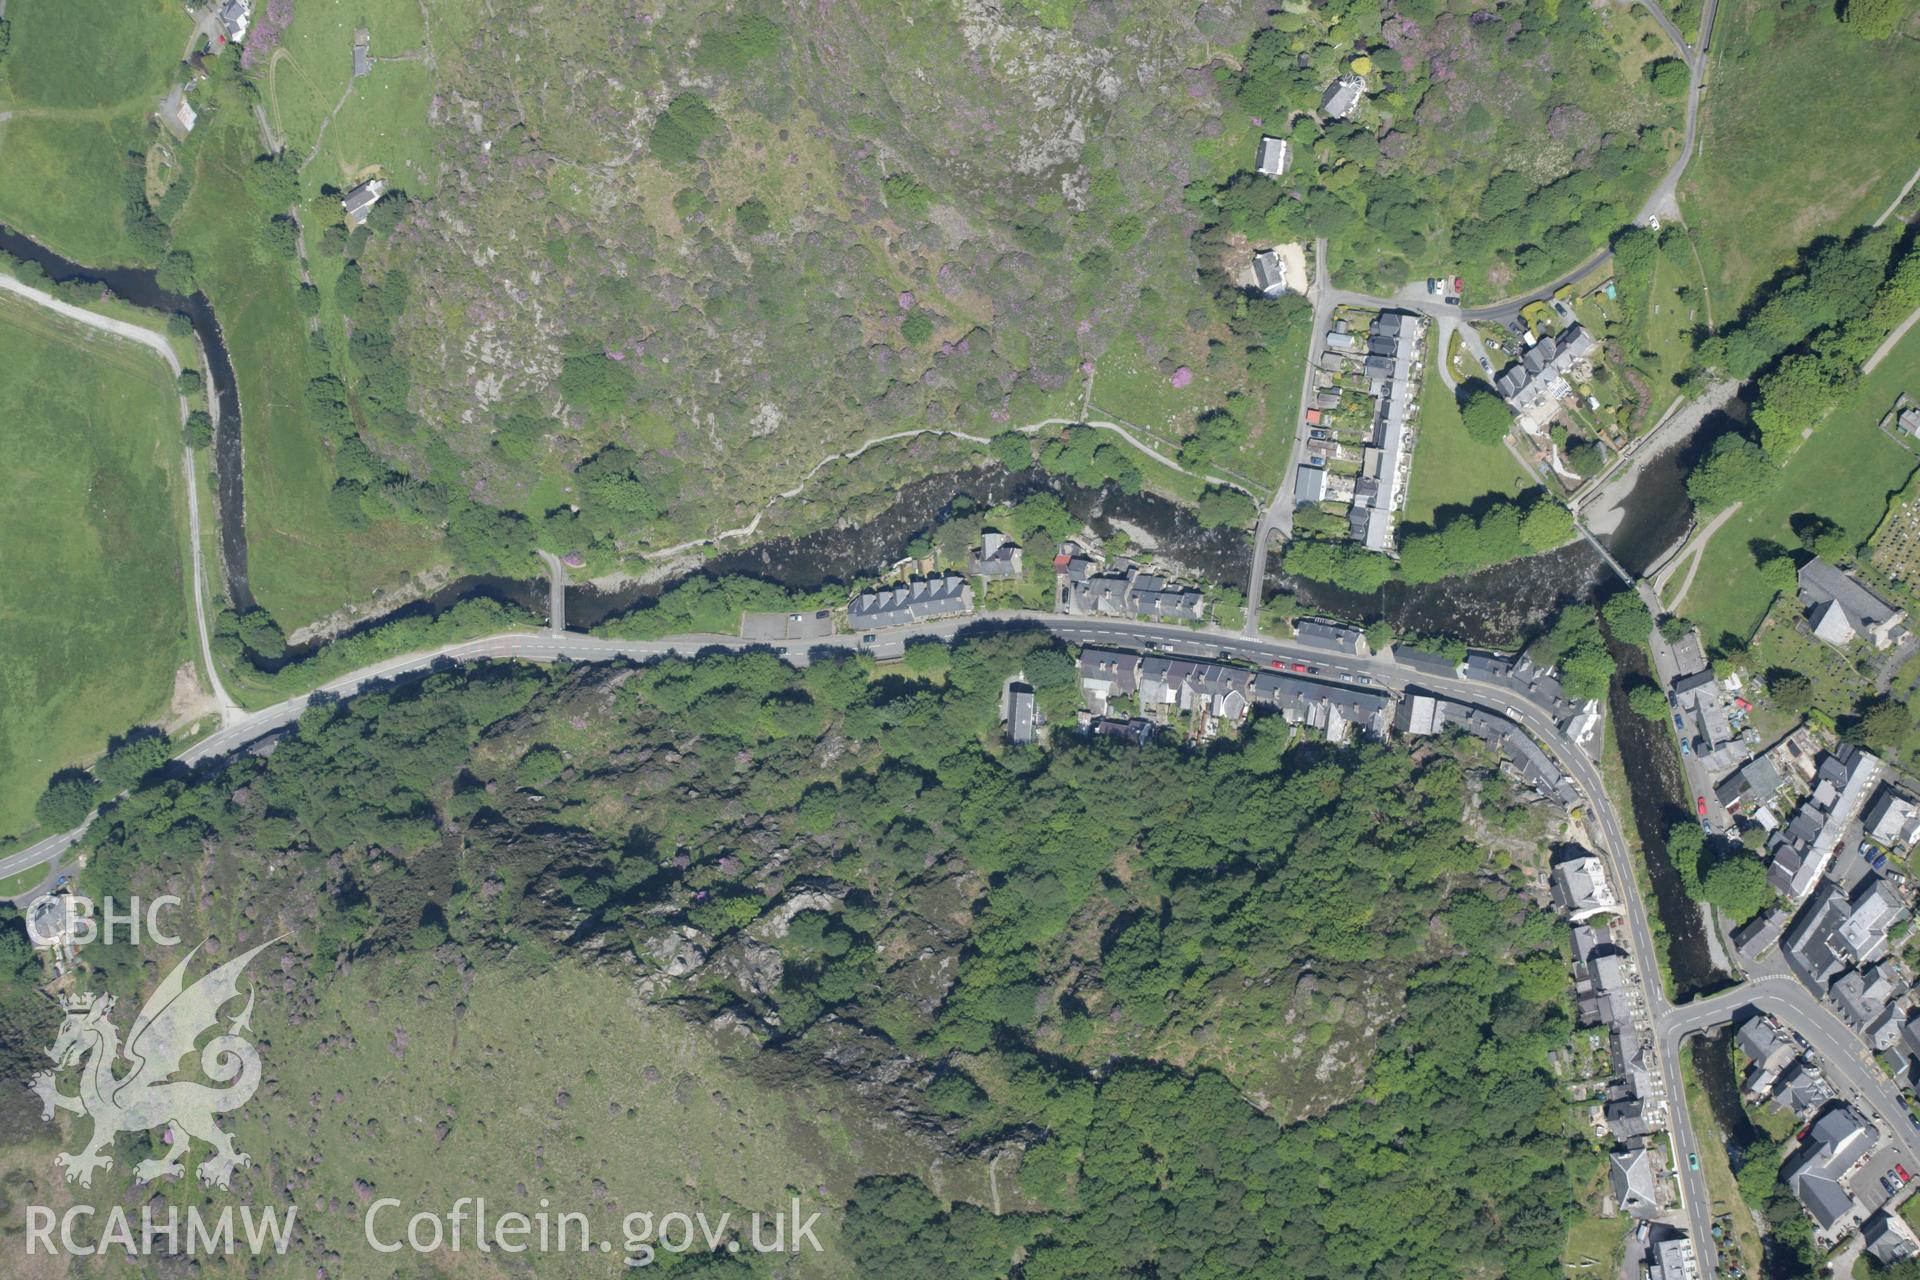 RCAHMW digital colour oblique photograph of Beddgelert viewed from the north-east. Taken on 08/06/2005 by T.G. Driver.